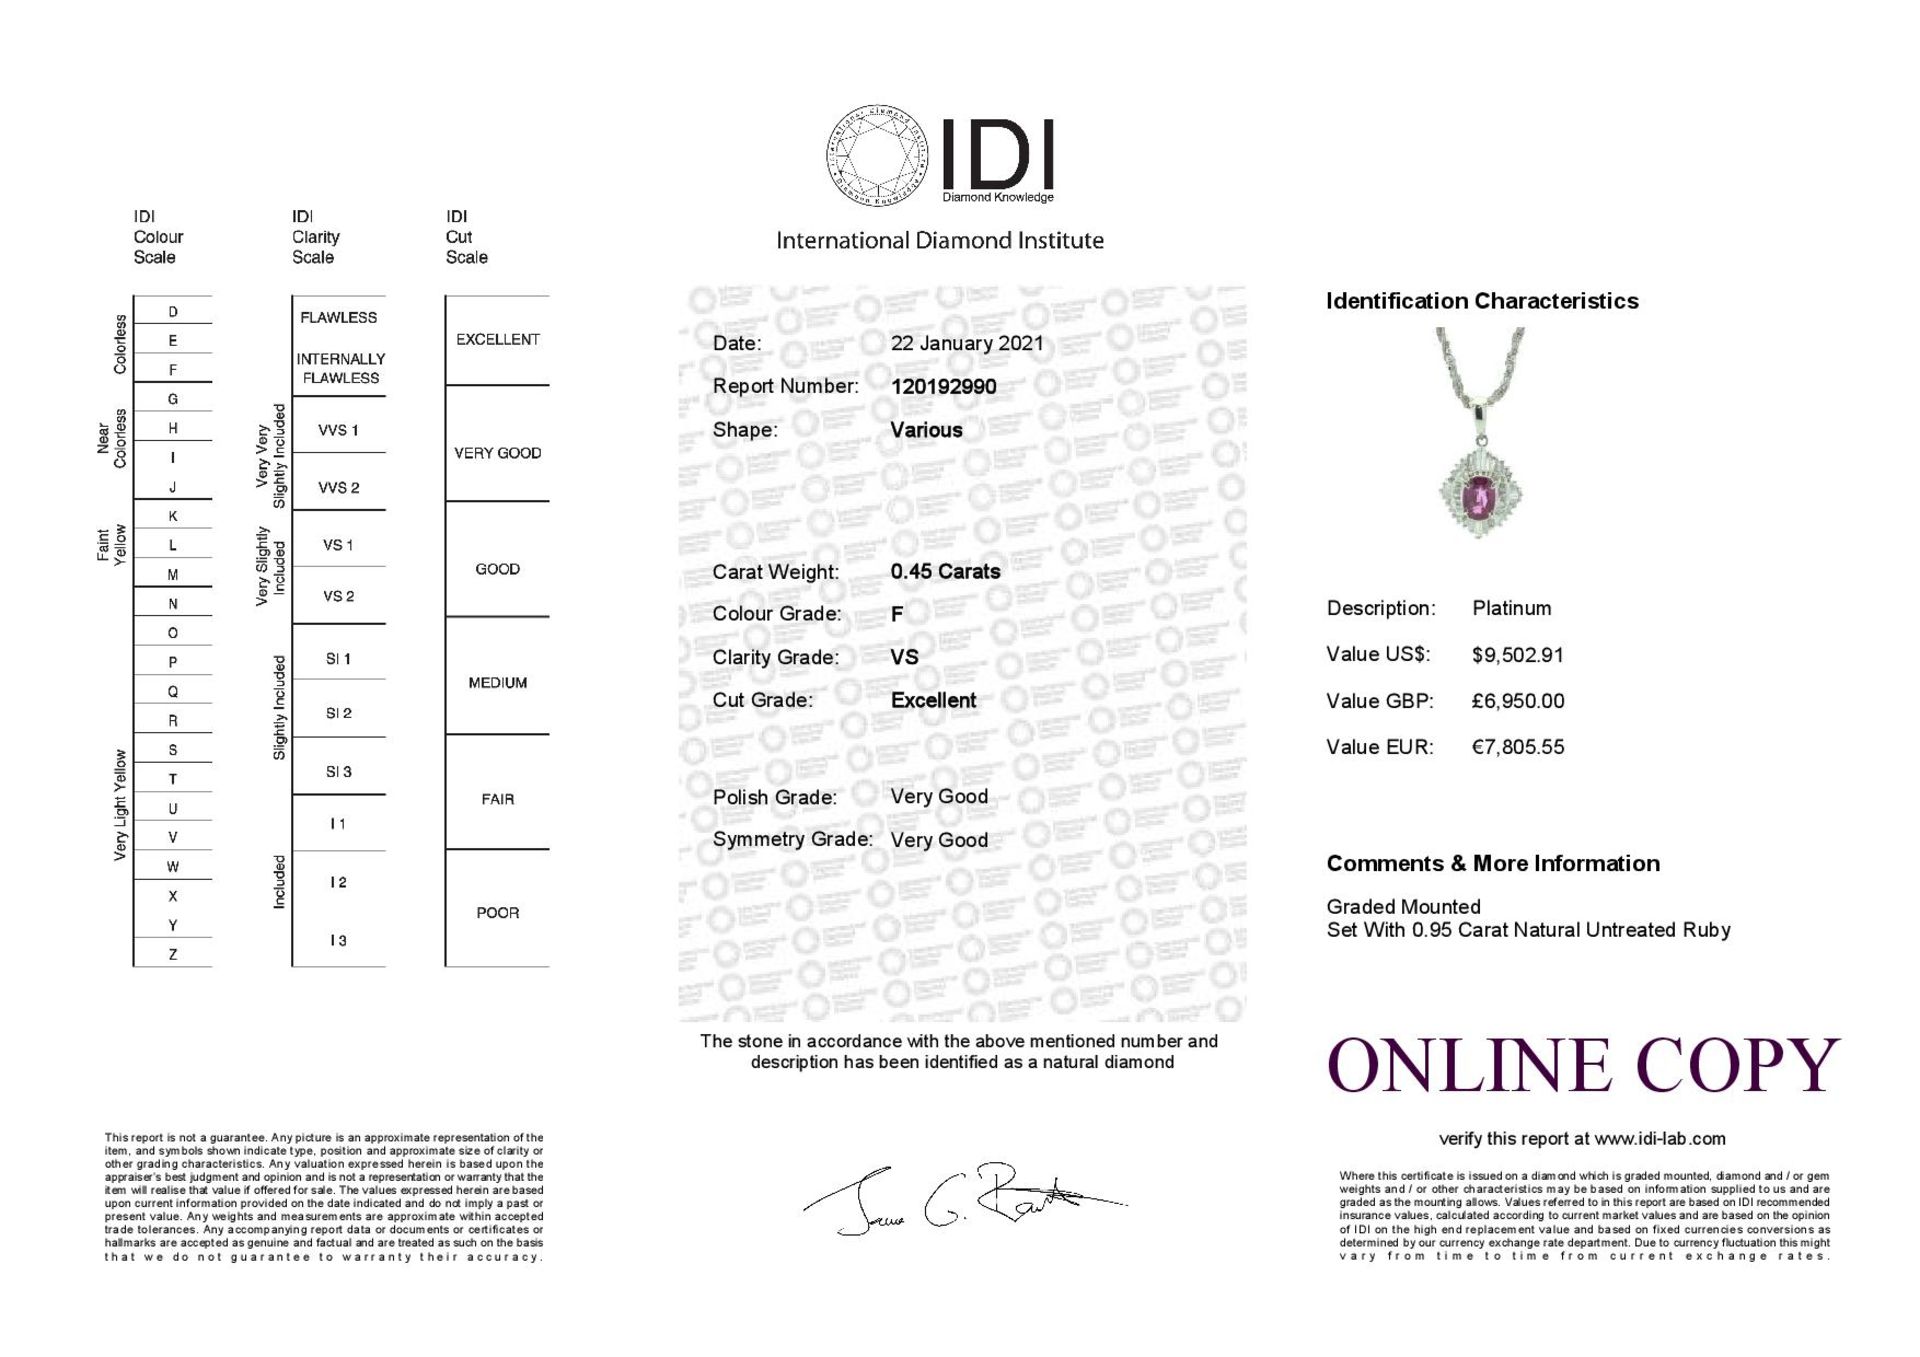 Platinum Cluster Diamond And Ruby Necklace (R0.95) 0.45 Carats - Valued by IDI £6,950.00 - - Image 3 of 4